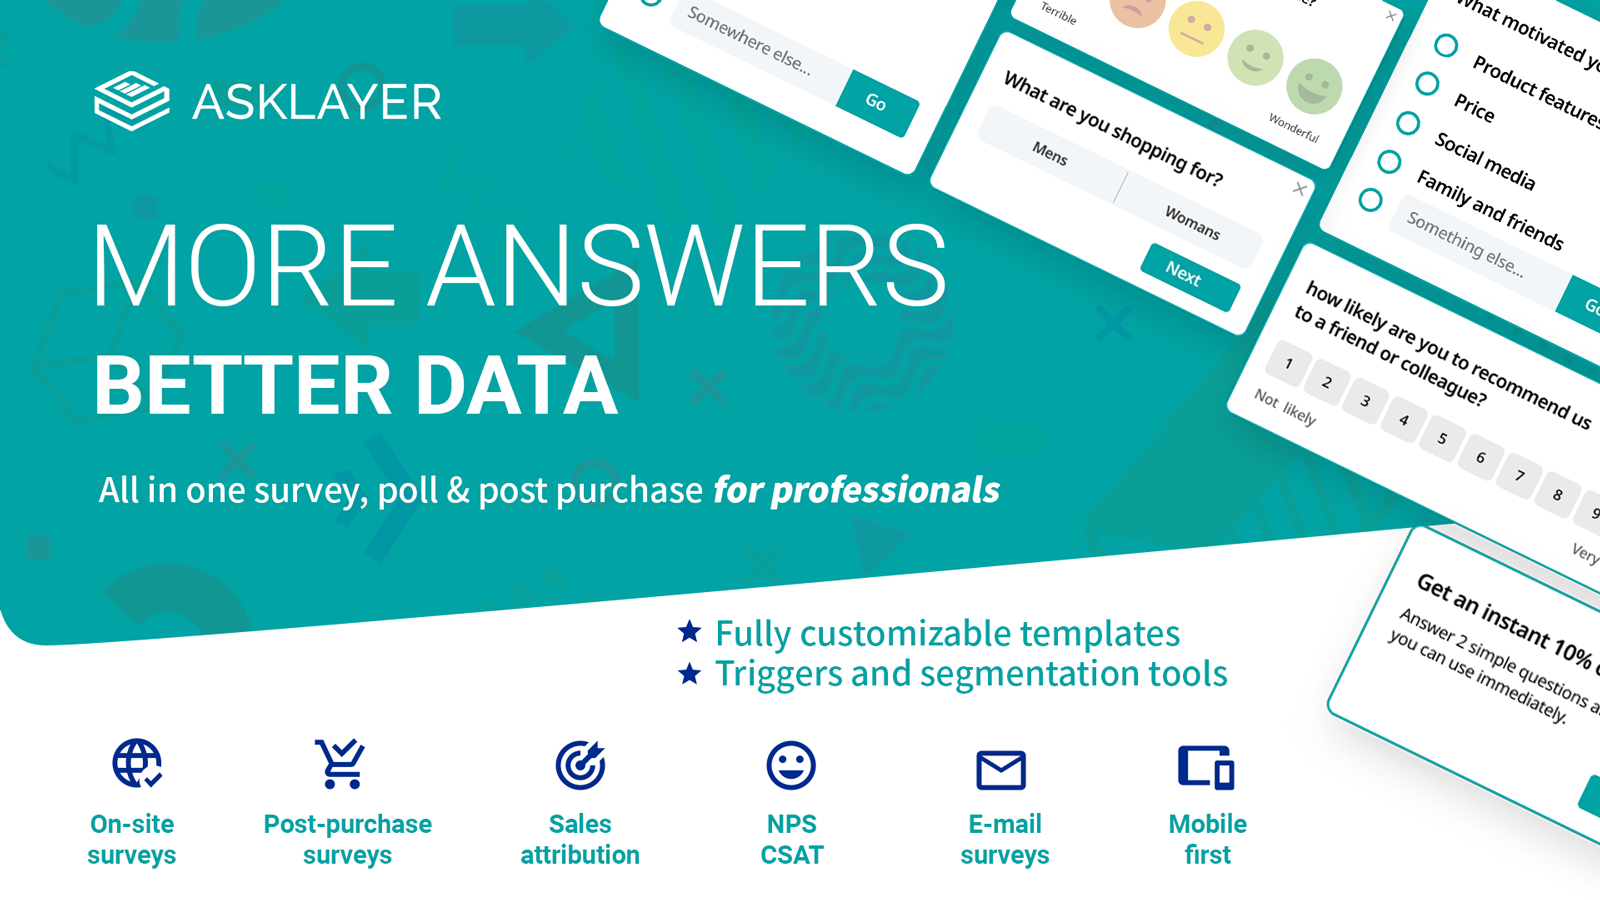 Asklayer surveys, polls and post-purchase for pros w/ NPS + more